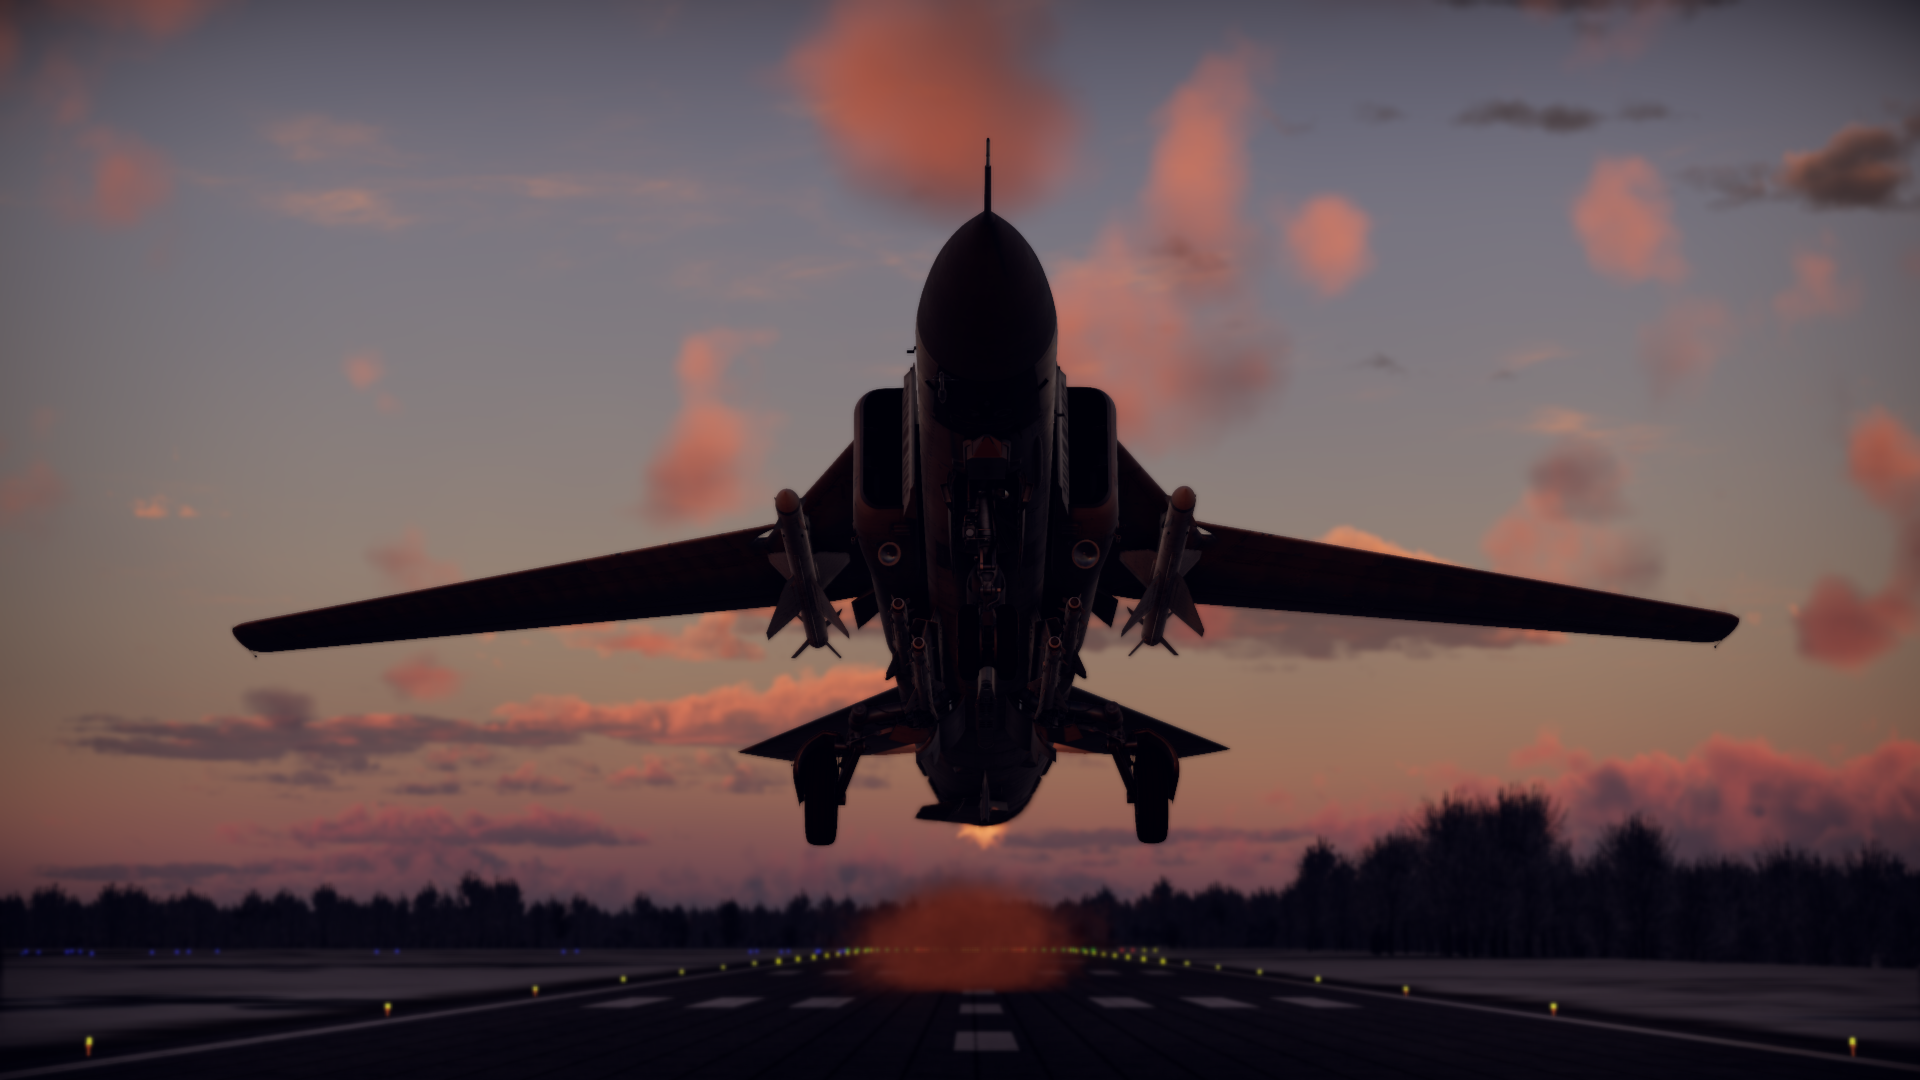 MiG 23ML War Thunder Airplane Jet Fighter Sunset Sunset Glow Clouds Sky Aircraft Video Games CGi 1920x1080